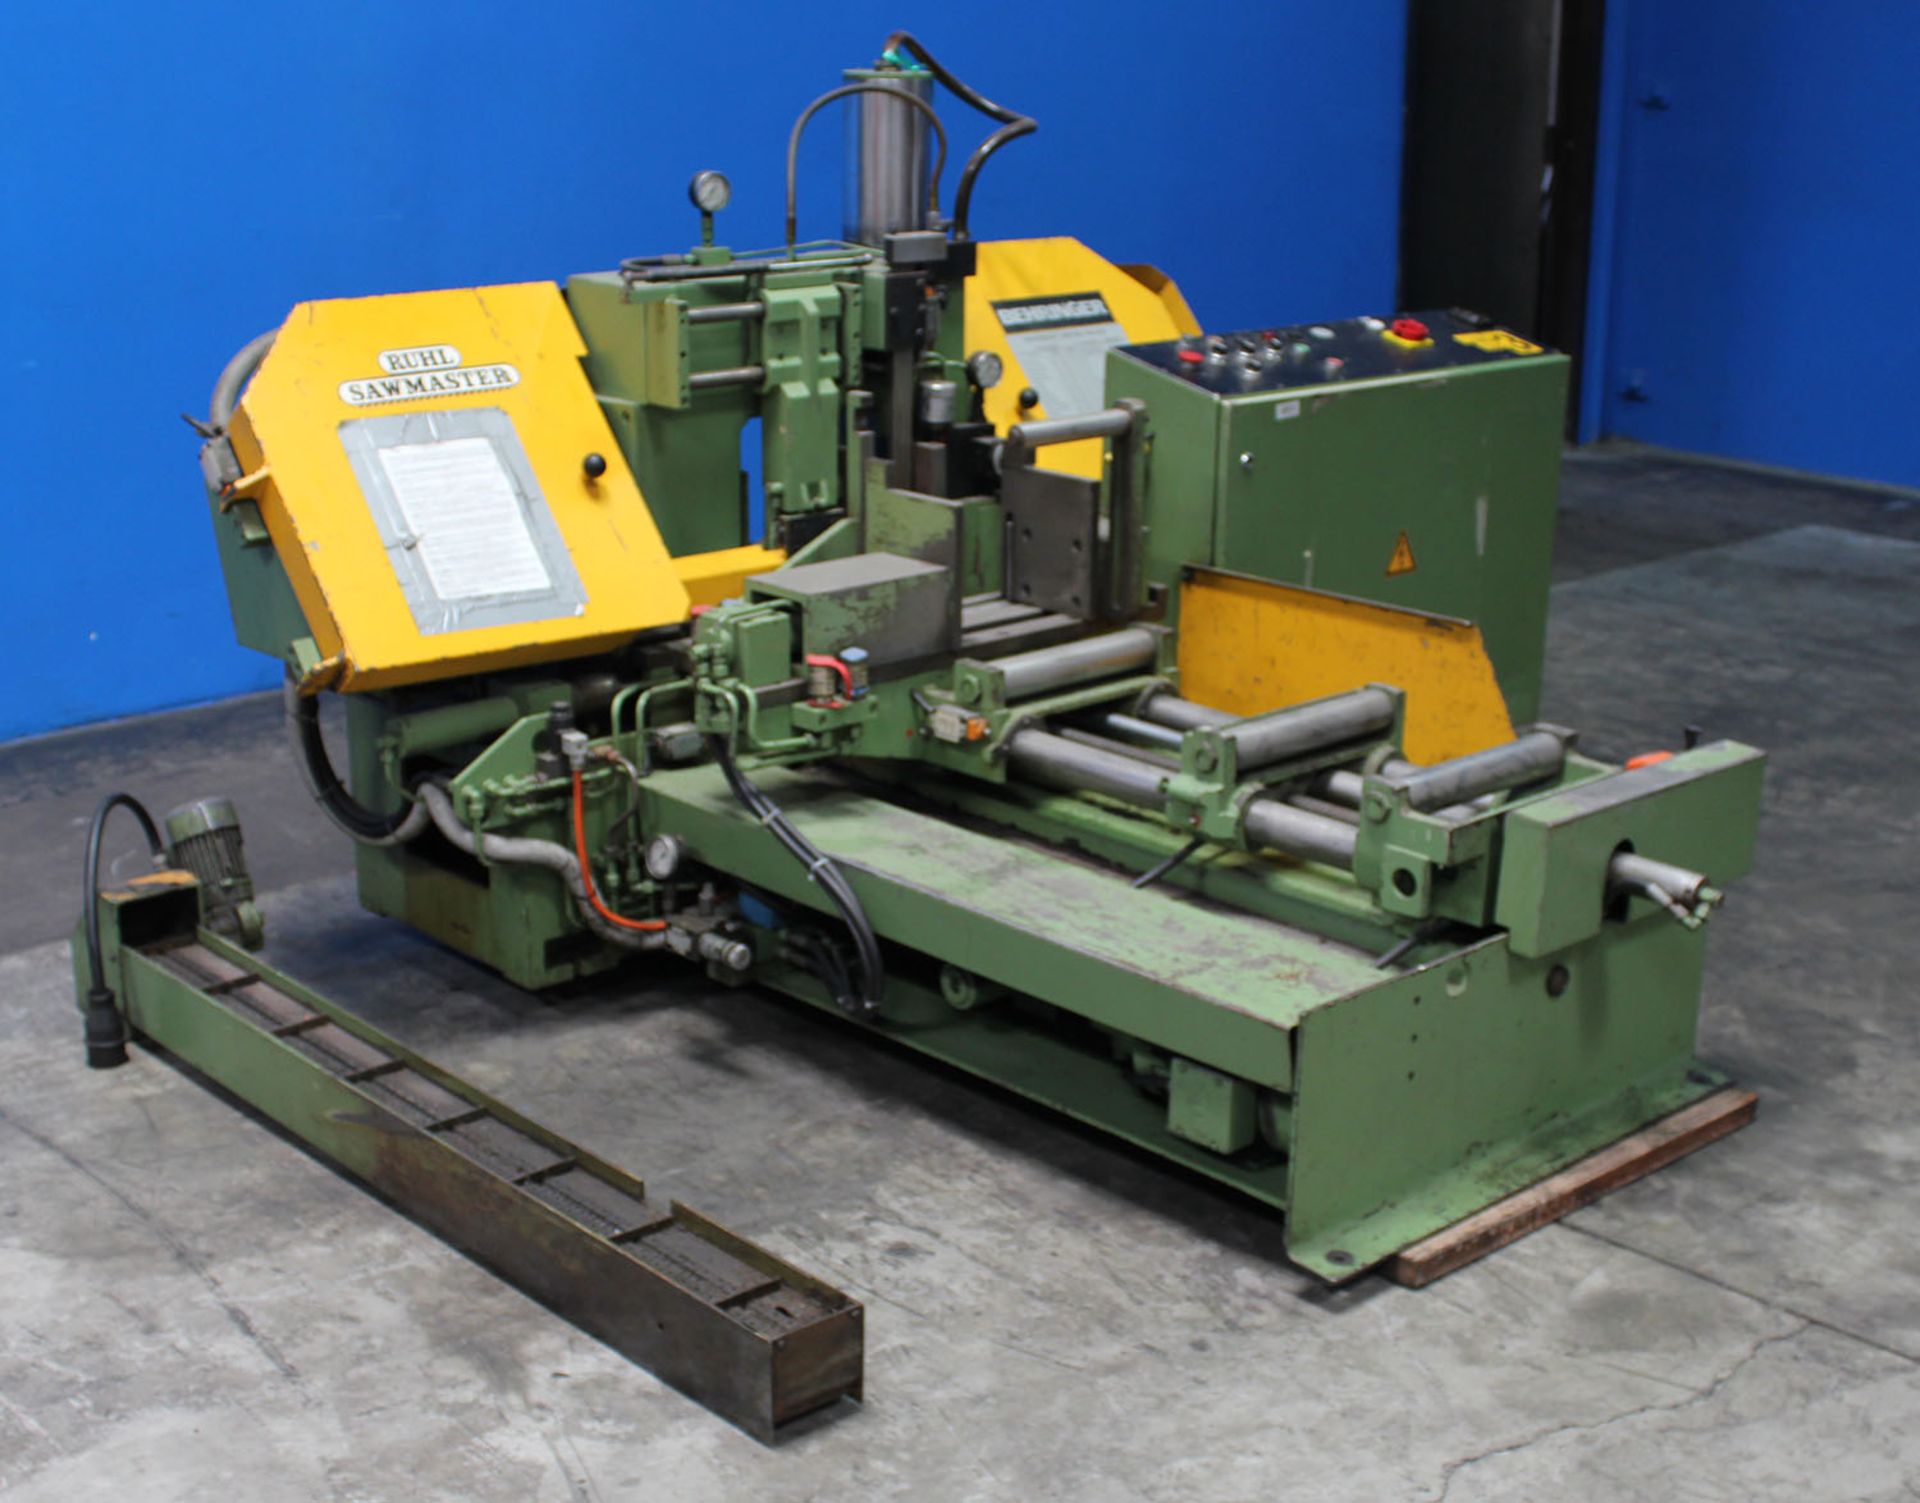 12'' x 10" Behringer Auto. Horiz. Metal Cutting Band Saw - Located In: Huntington Park, CA - Image 3 of 7